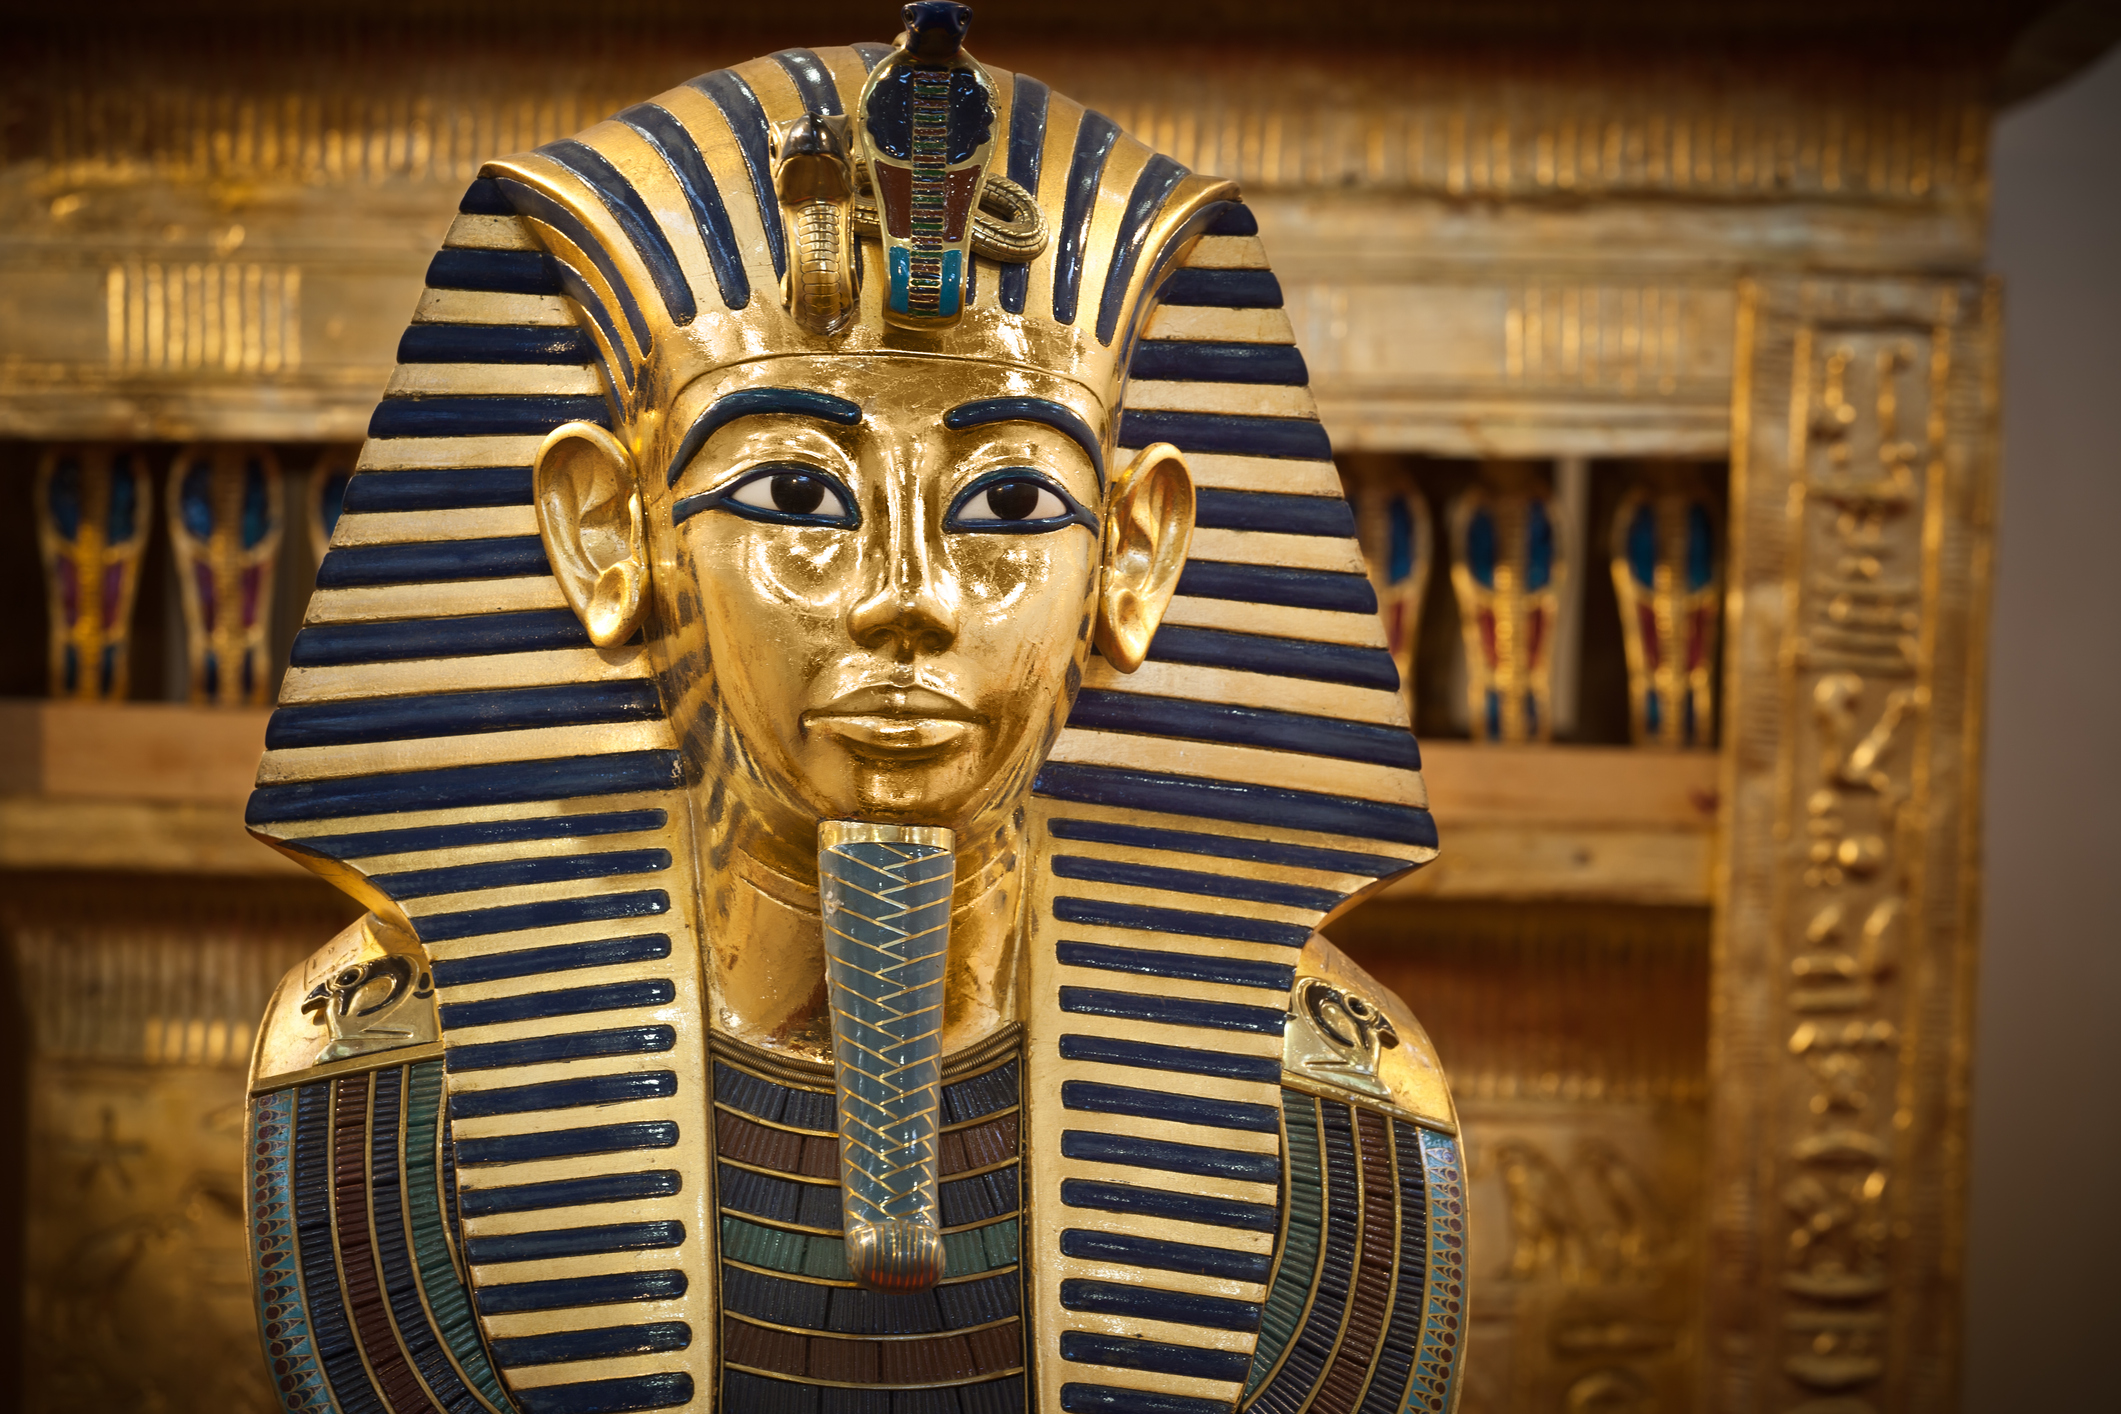 Scientists have succeeded in deciphering the cause of the mysterious deaths around Tutankhamun's tomb